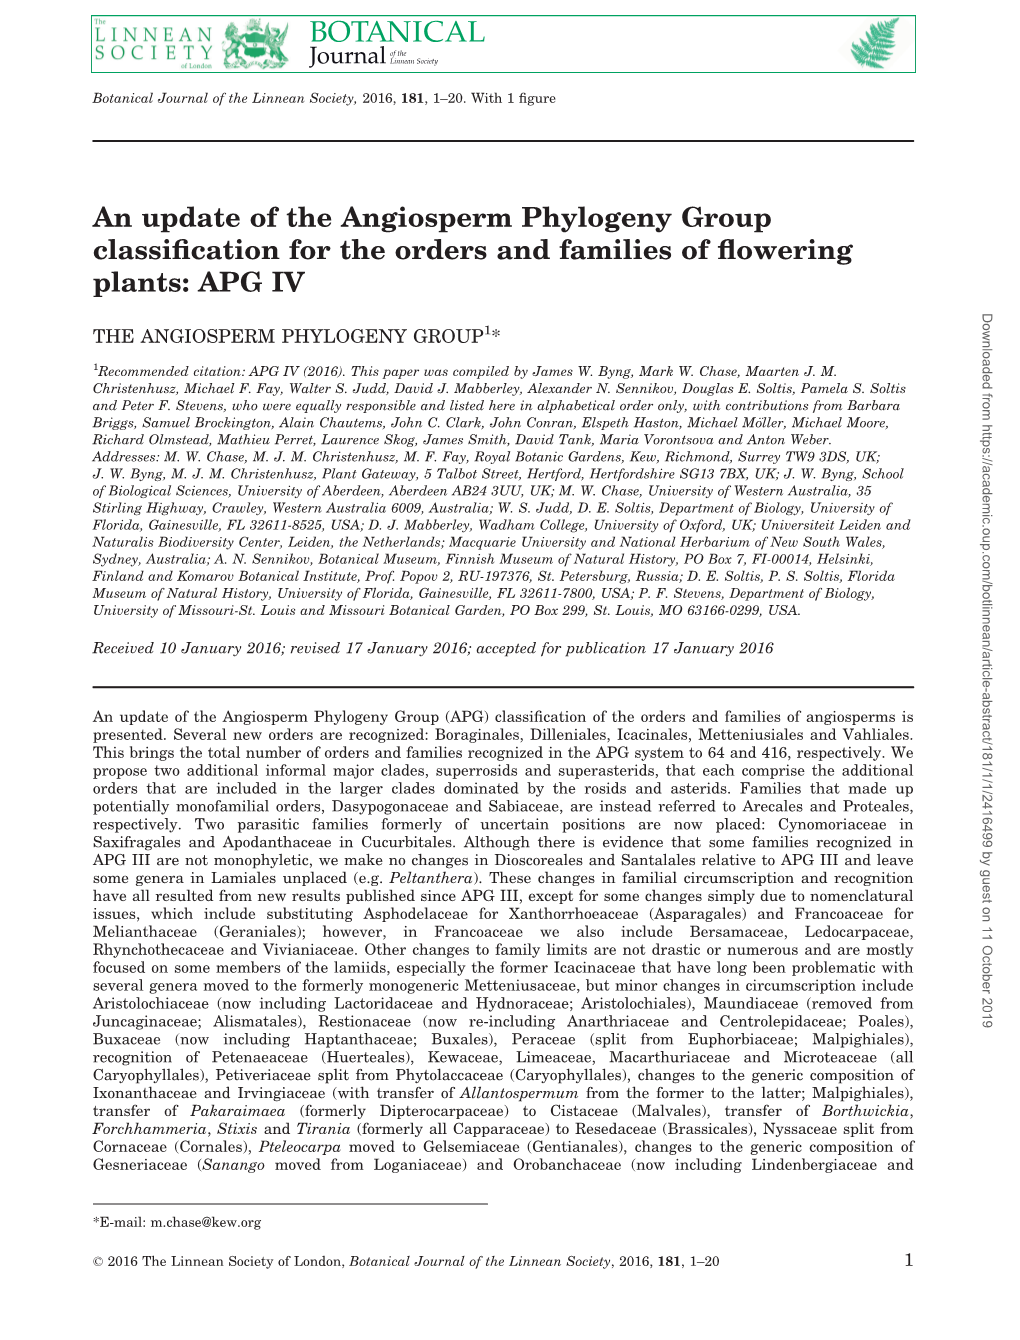 An Update of the Angiosperm Phylogeny Group Classification For